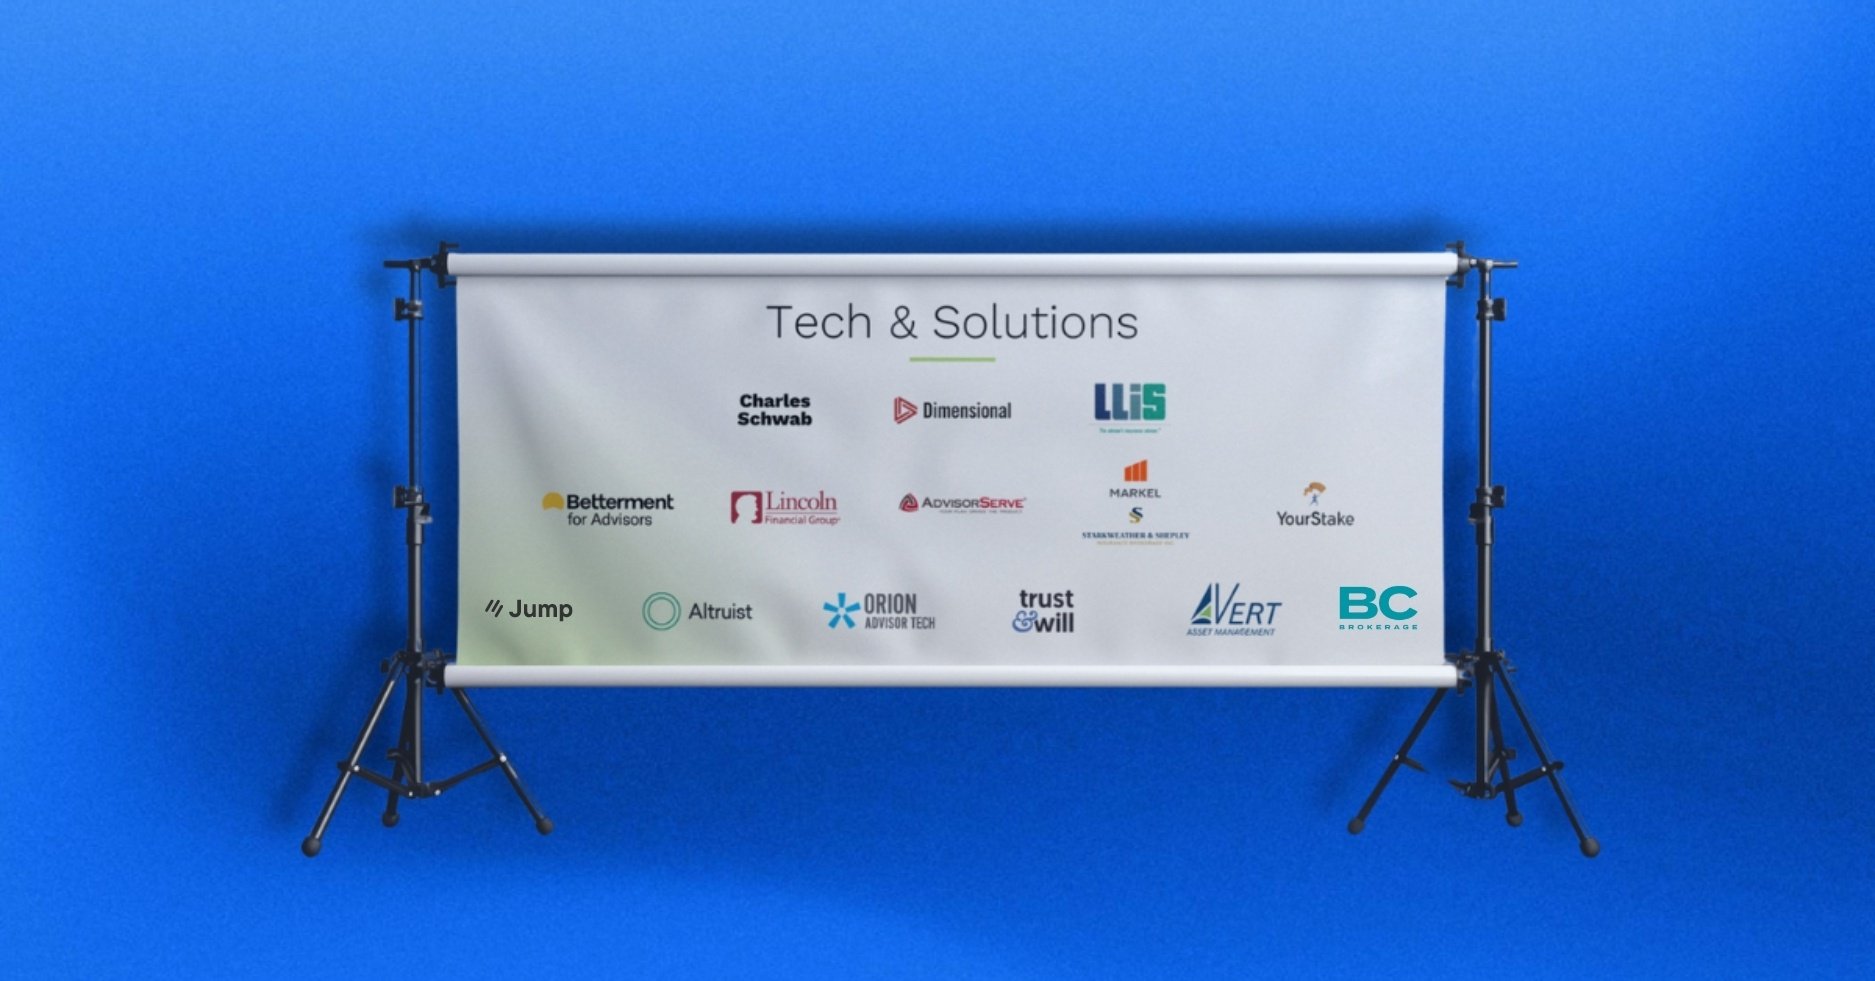 A sign with all the sponsors showcased on it with a blue background.